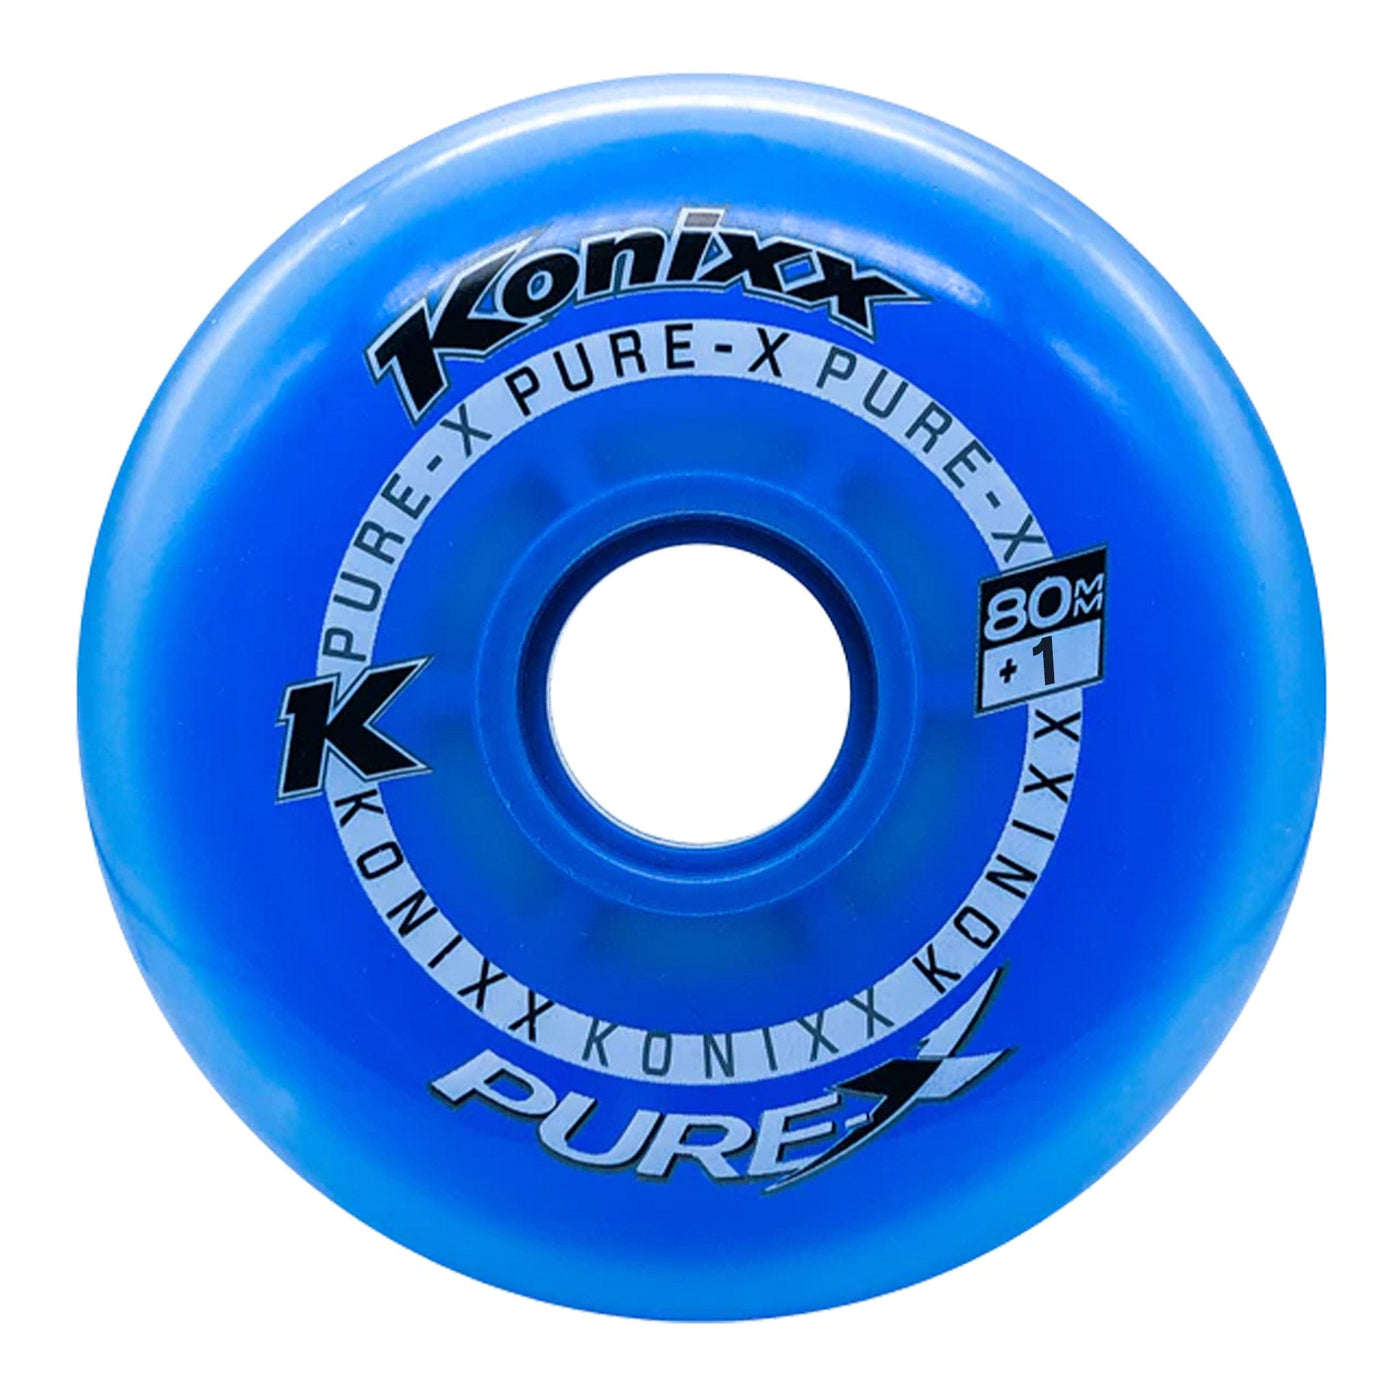 Konixx Pure-X Roller Hockey Wheels (Dual Pour Soft) - The Hockey Shop Source For Sports